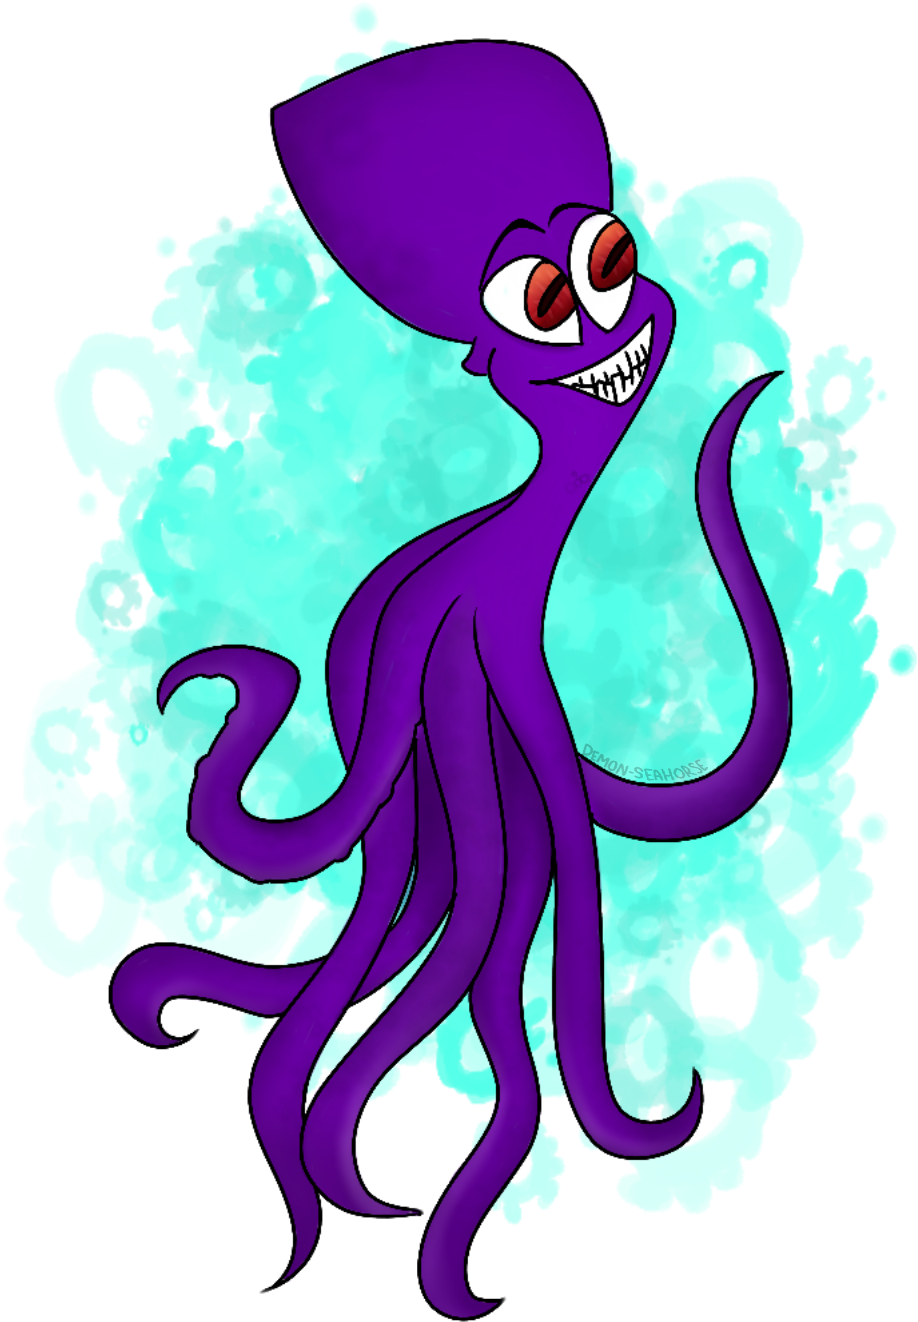 Dave The Octopus By Demon-seahorse - Illustration (1000x1500)